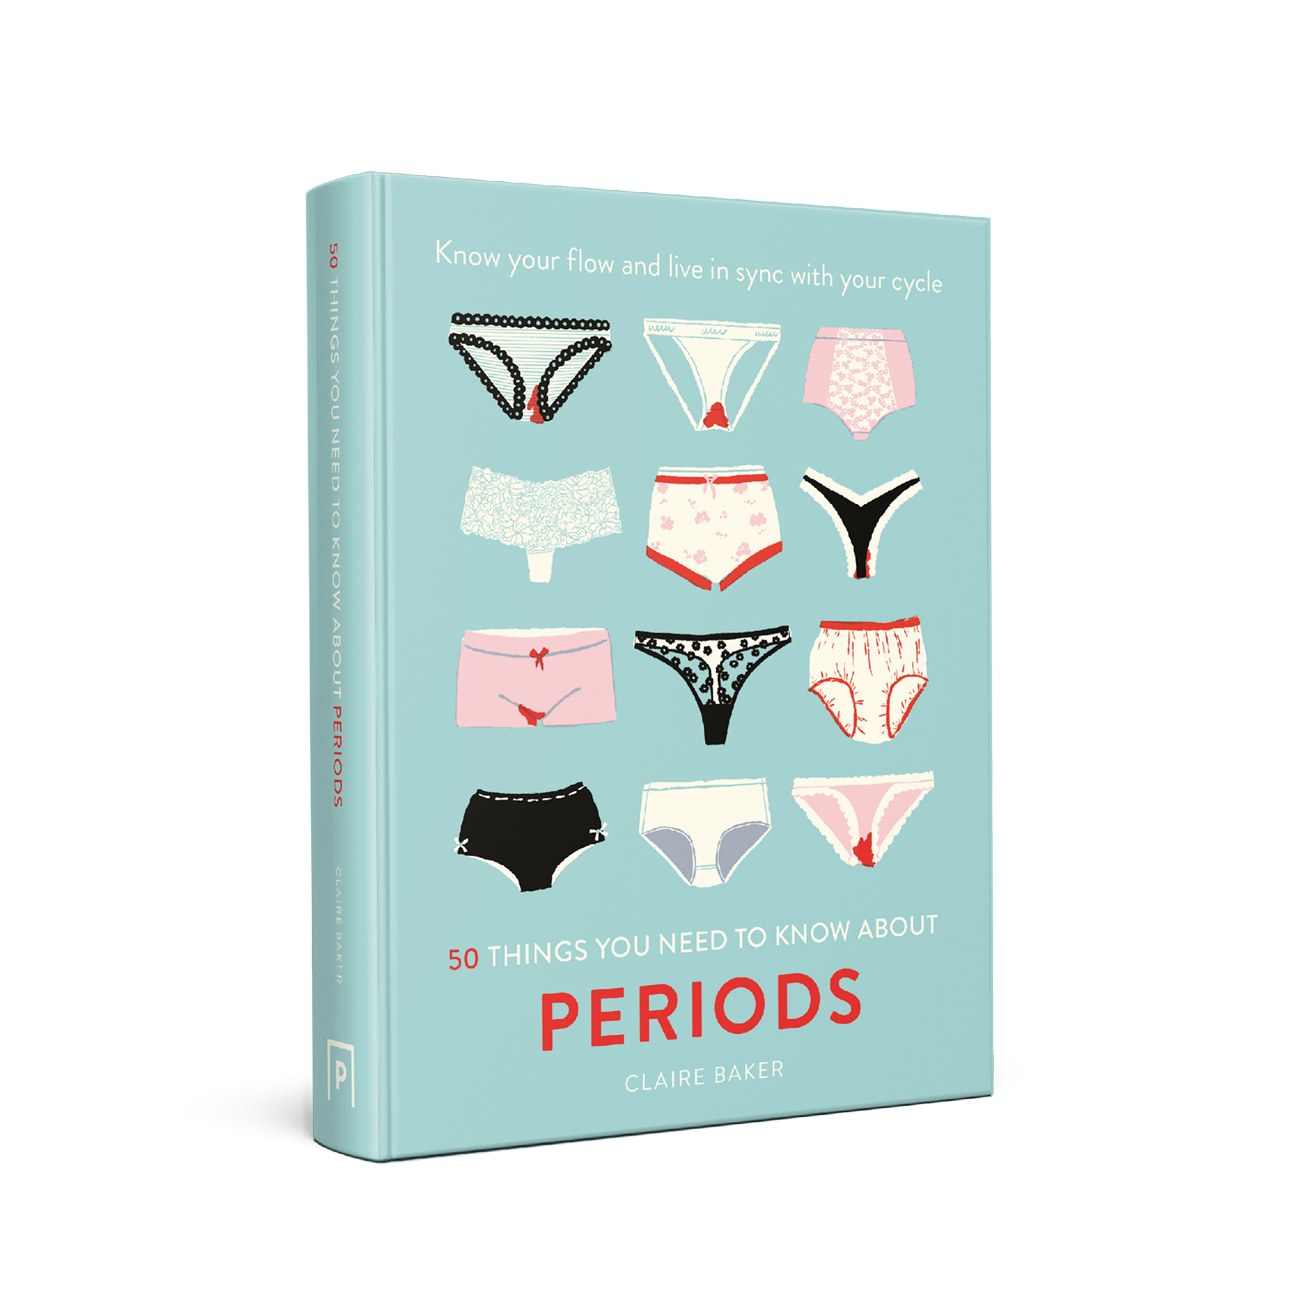 50 Things You Need to Know About Periods: Know your flow and live in sync with your cycle (Hardback)